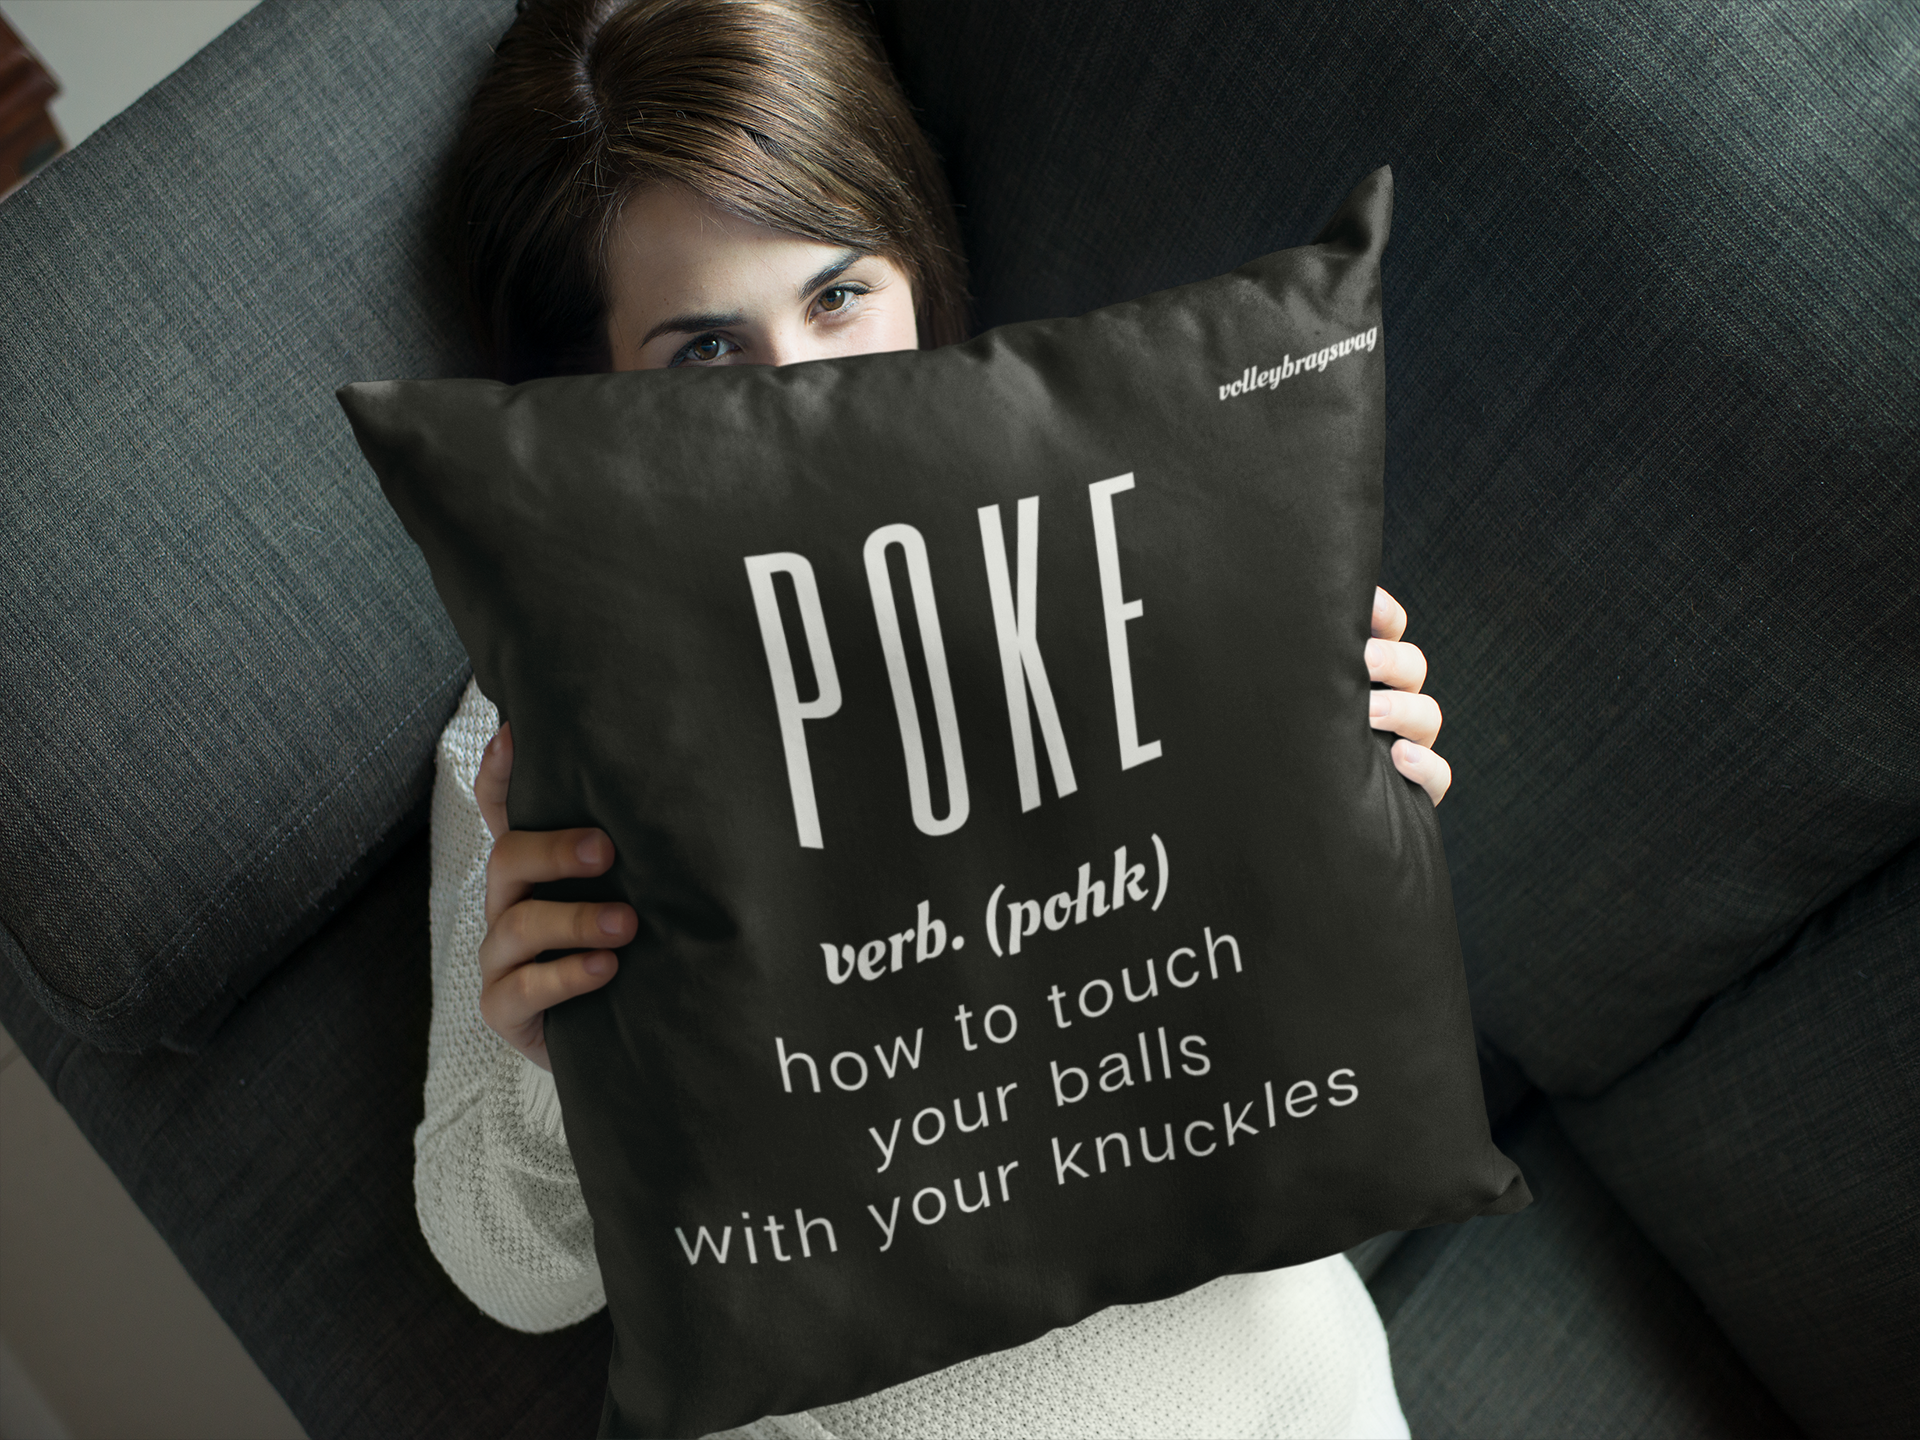 POKE (noun) How To Touch Your Balls With Your Knuckles volleyball pillow. April Chapple, Launches a Hilarious Volleyball Pillow Line With Fun Tongue-in-Cheek Designs sure to make players laugh.